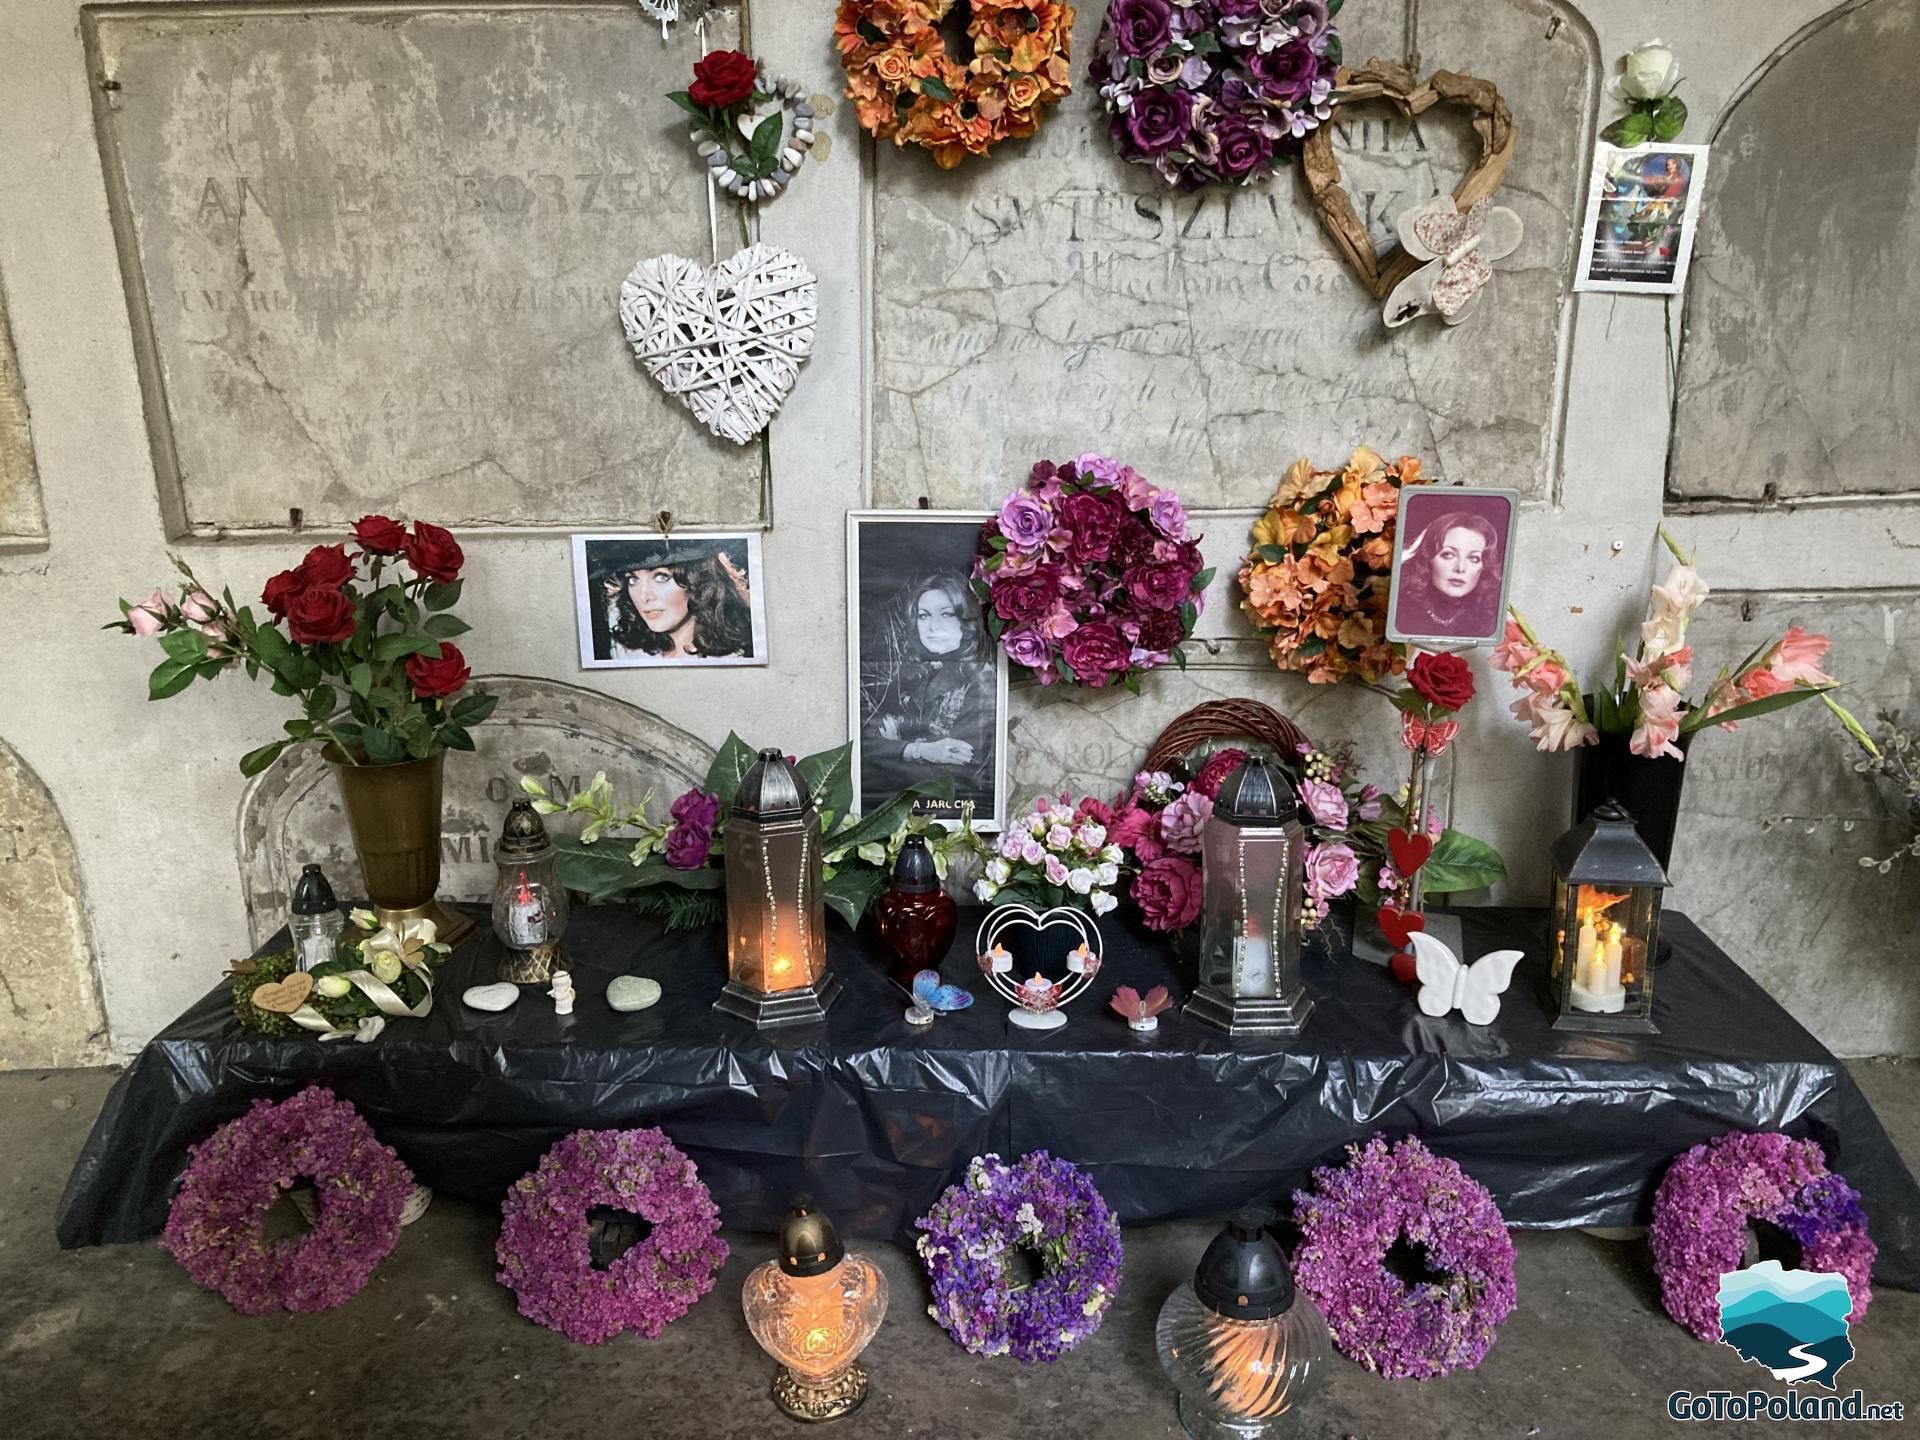 a wall with photos commemorating the dead singer, there are also flowers and artificial hearts